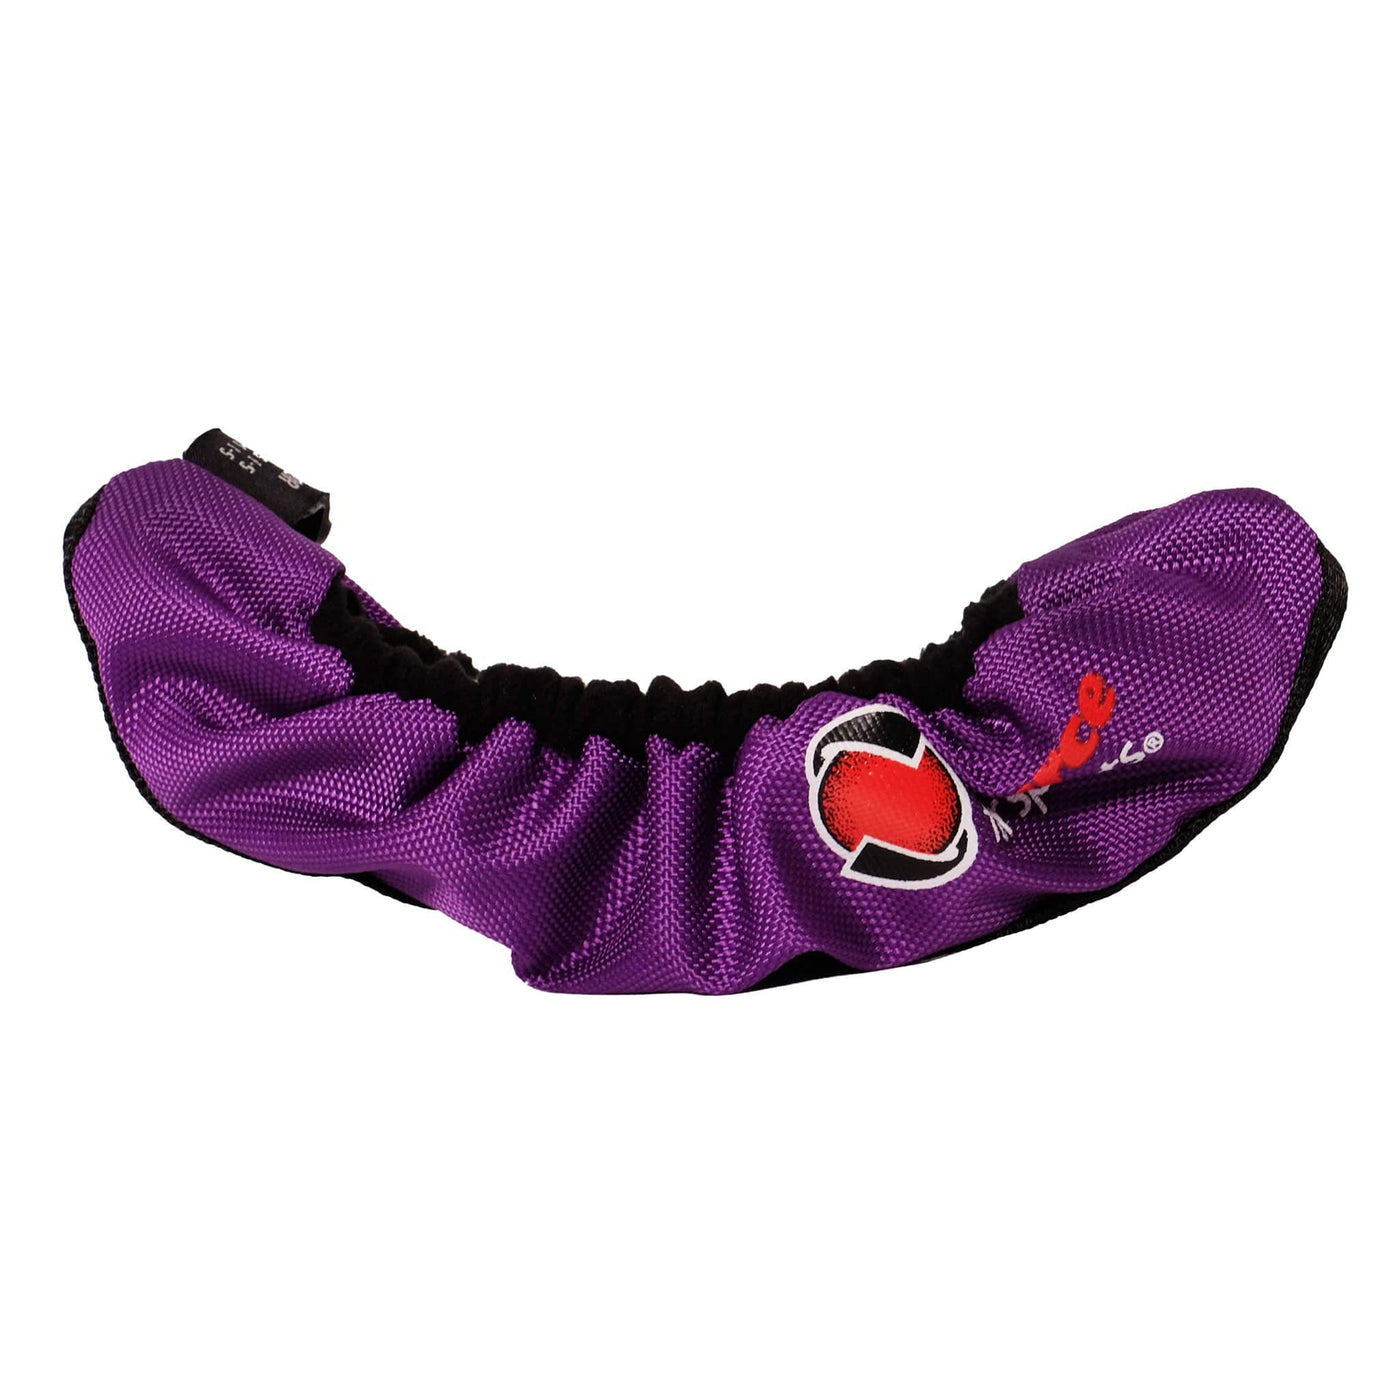 Blue Sports Platinum Soaker Skate Guards - The Hockey Shop Source For Sports